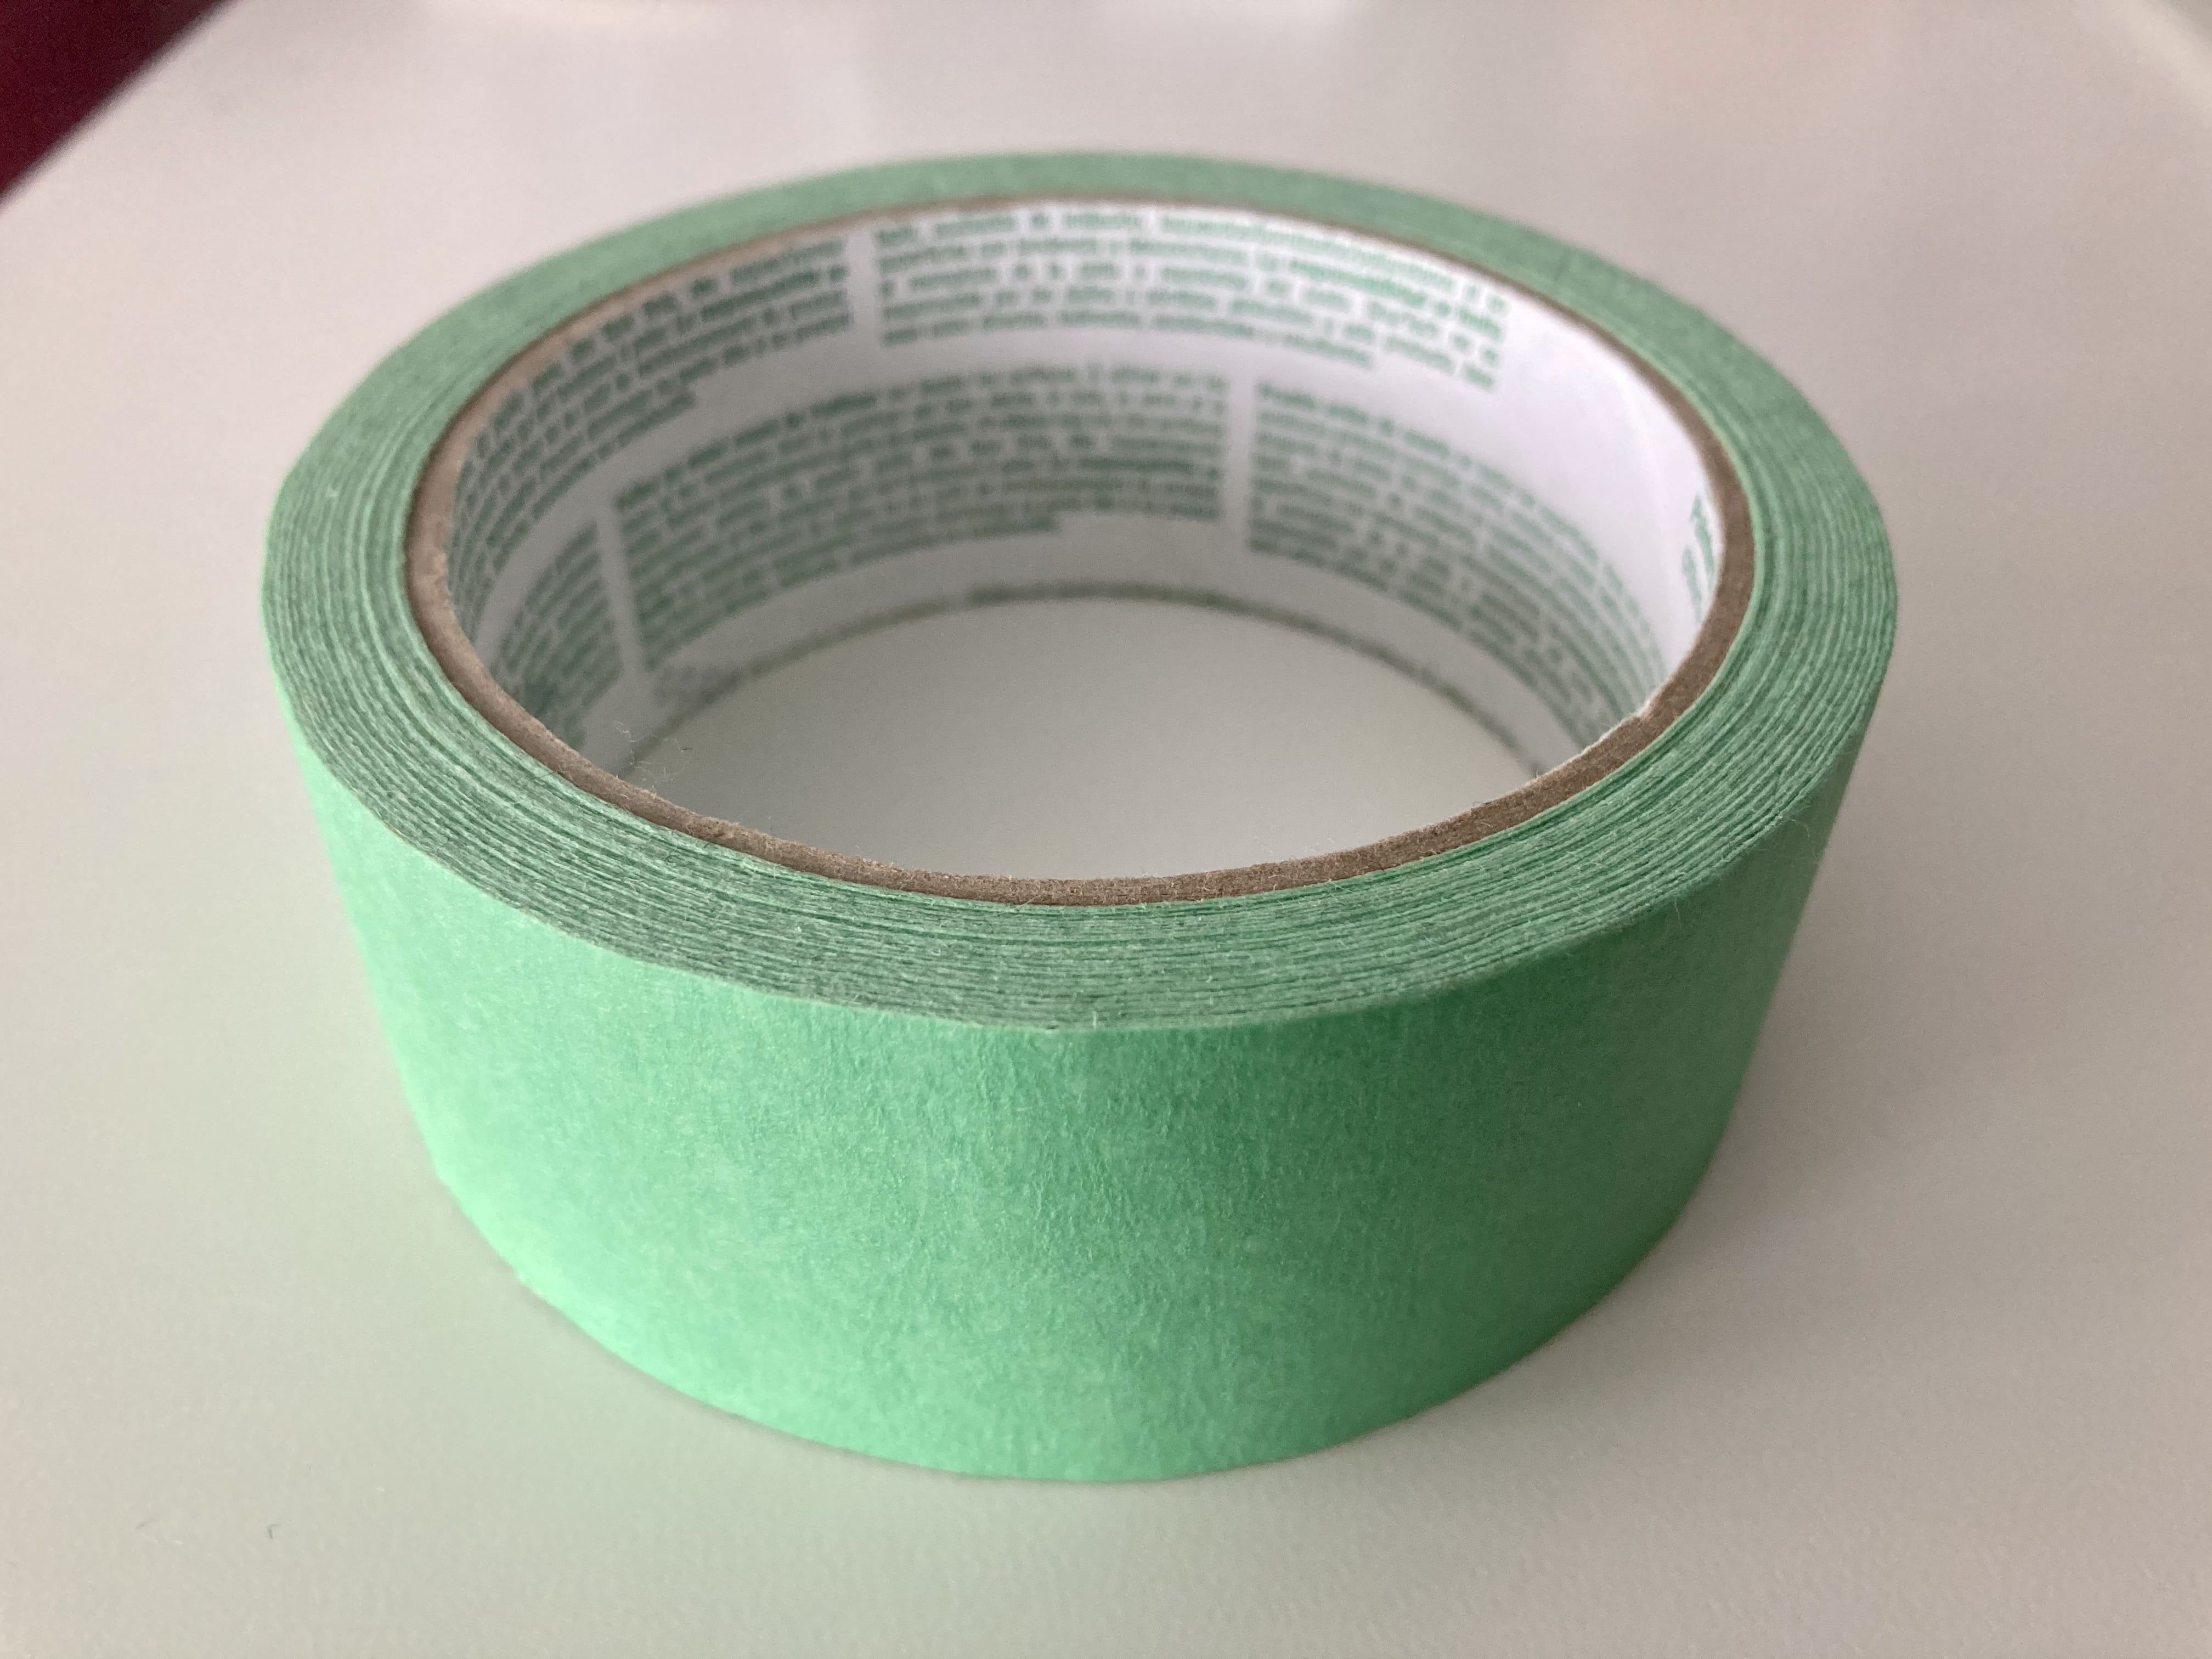 How to choose the right types of masking tape?